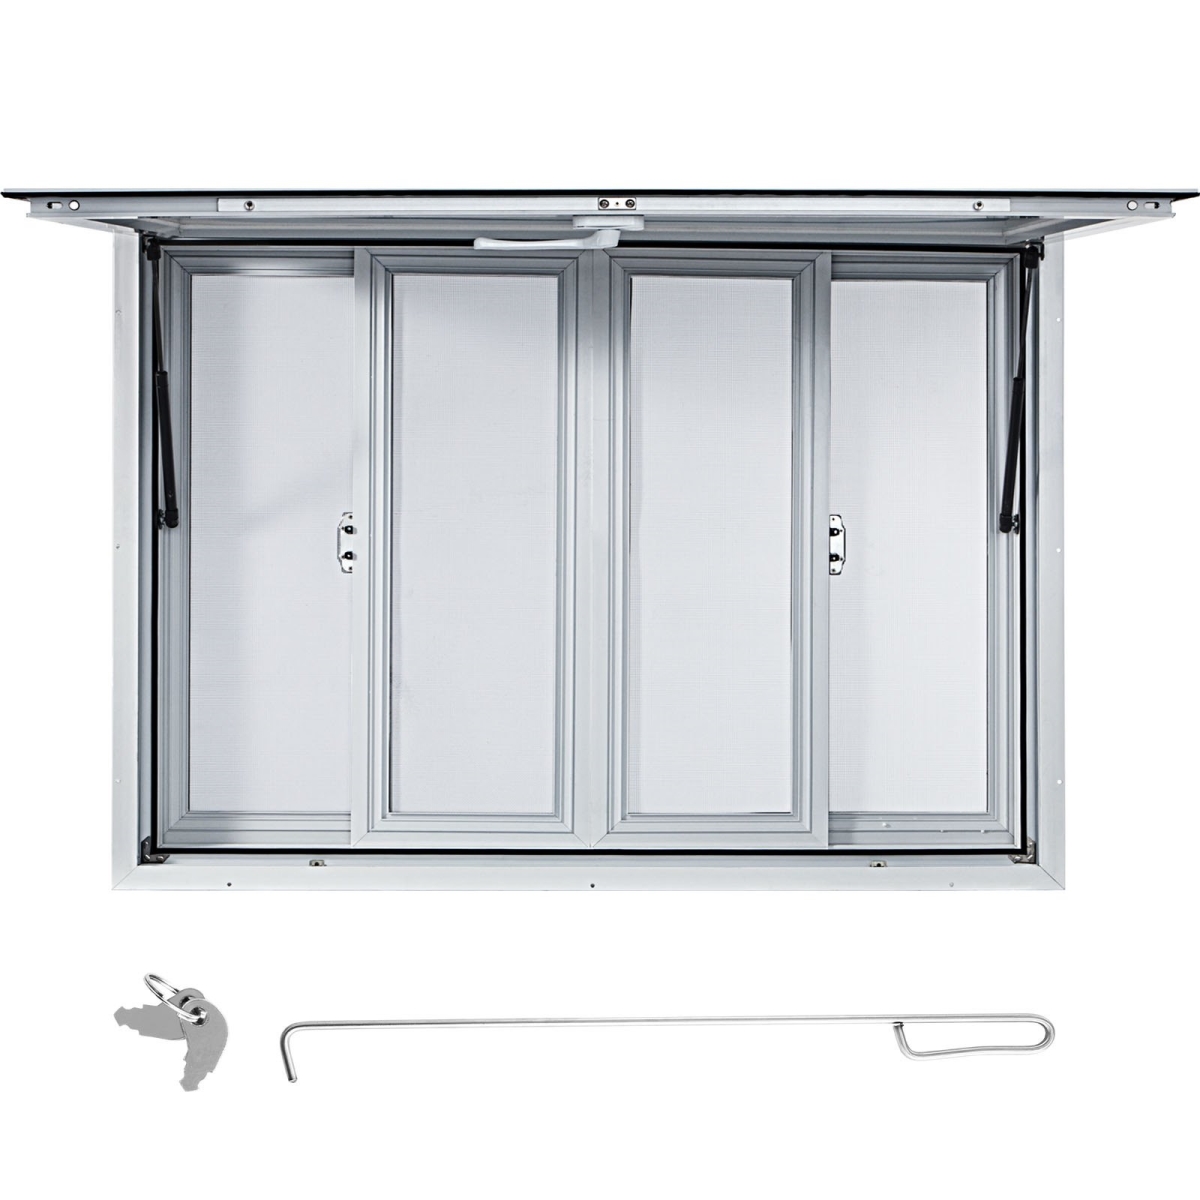 Picture of Vevor SCFWCKYCB5333TX4GV0 53 x 33 in. Aluminum Alloy Food Truck Service Window